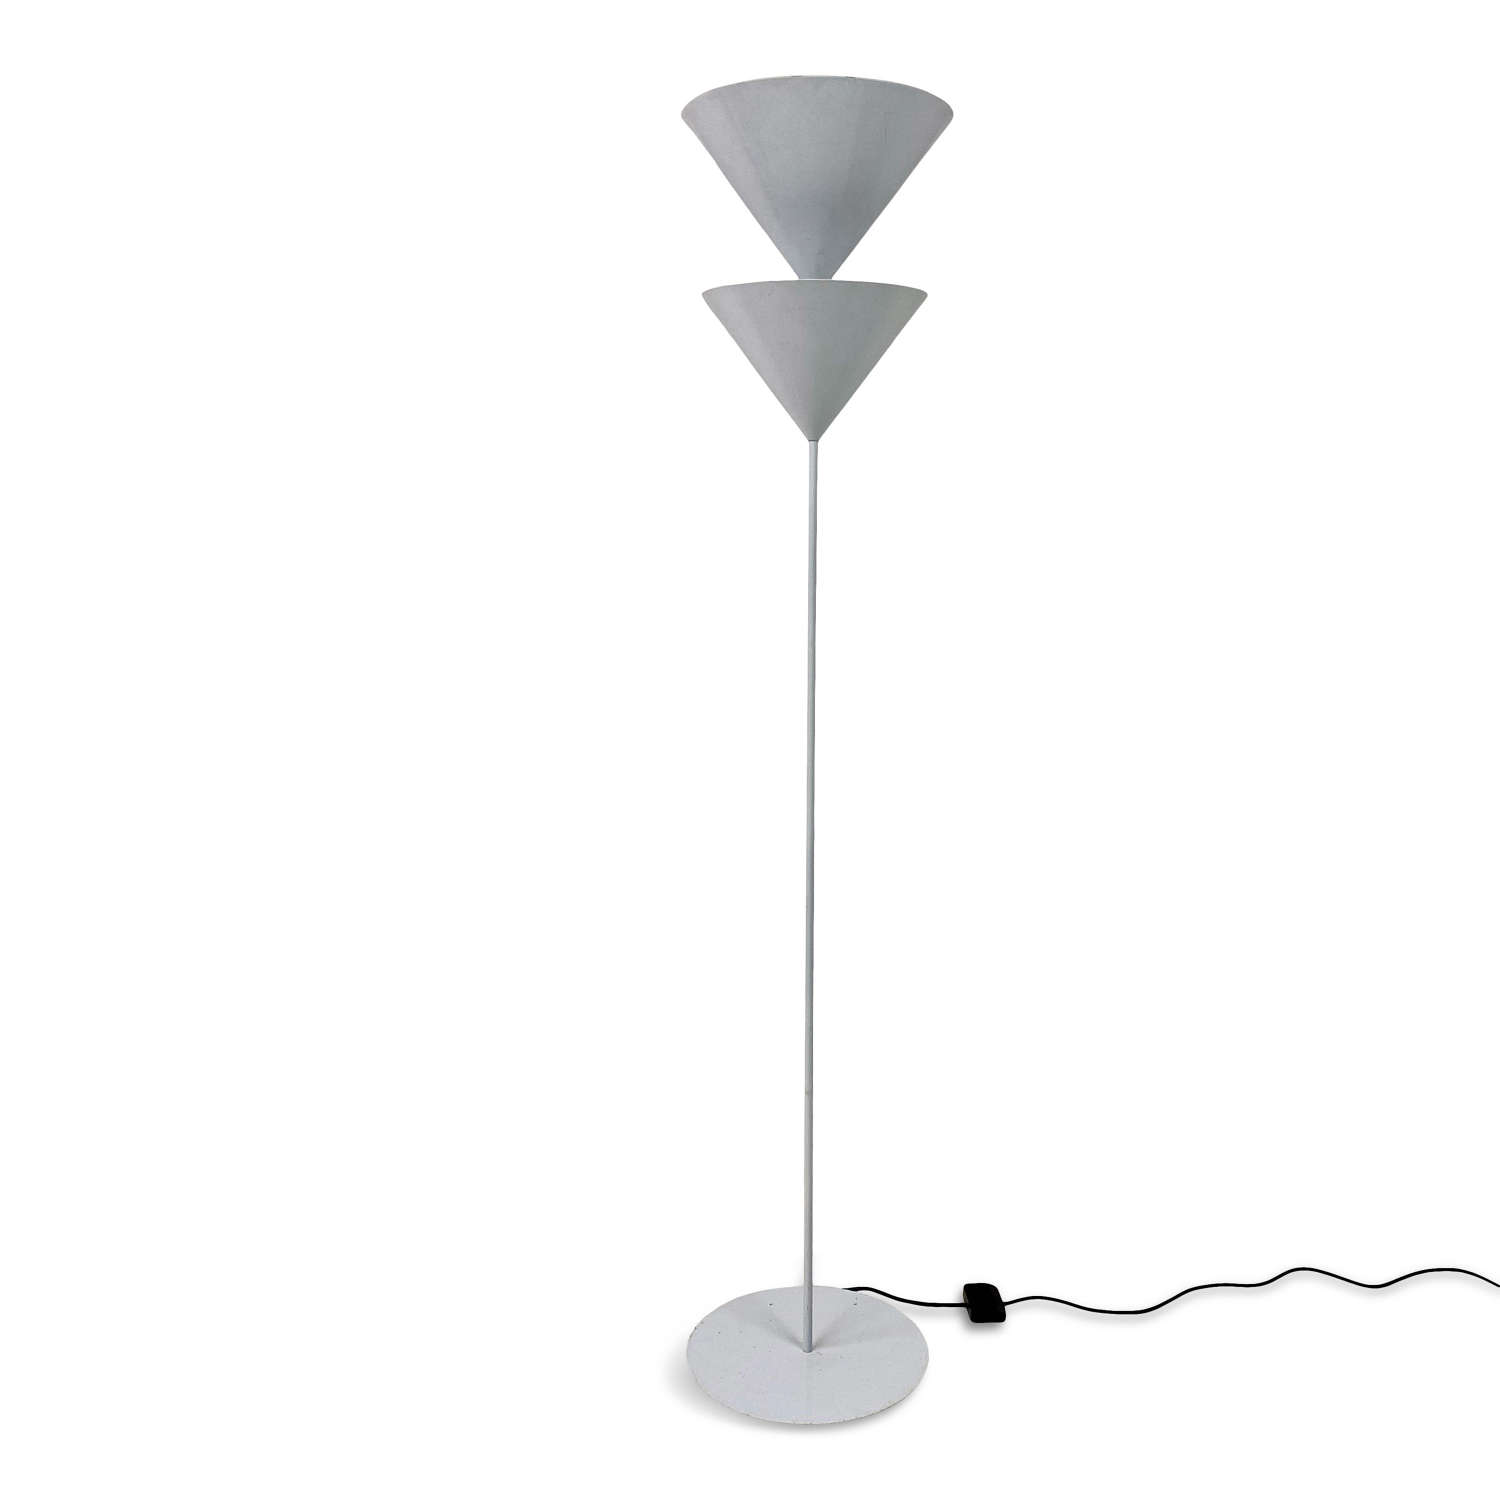 1980s Pascal Floor Lamp by Vico Magistretti for Oluce